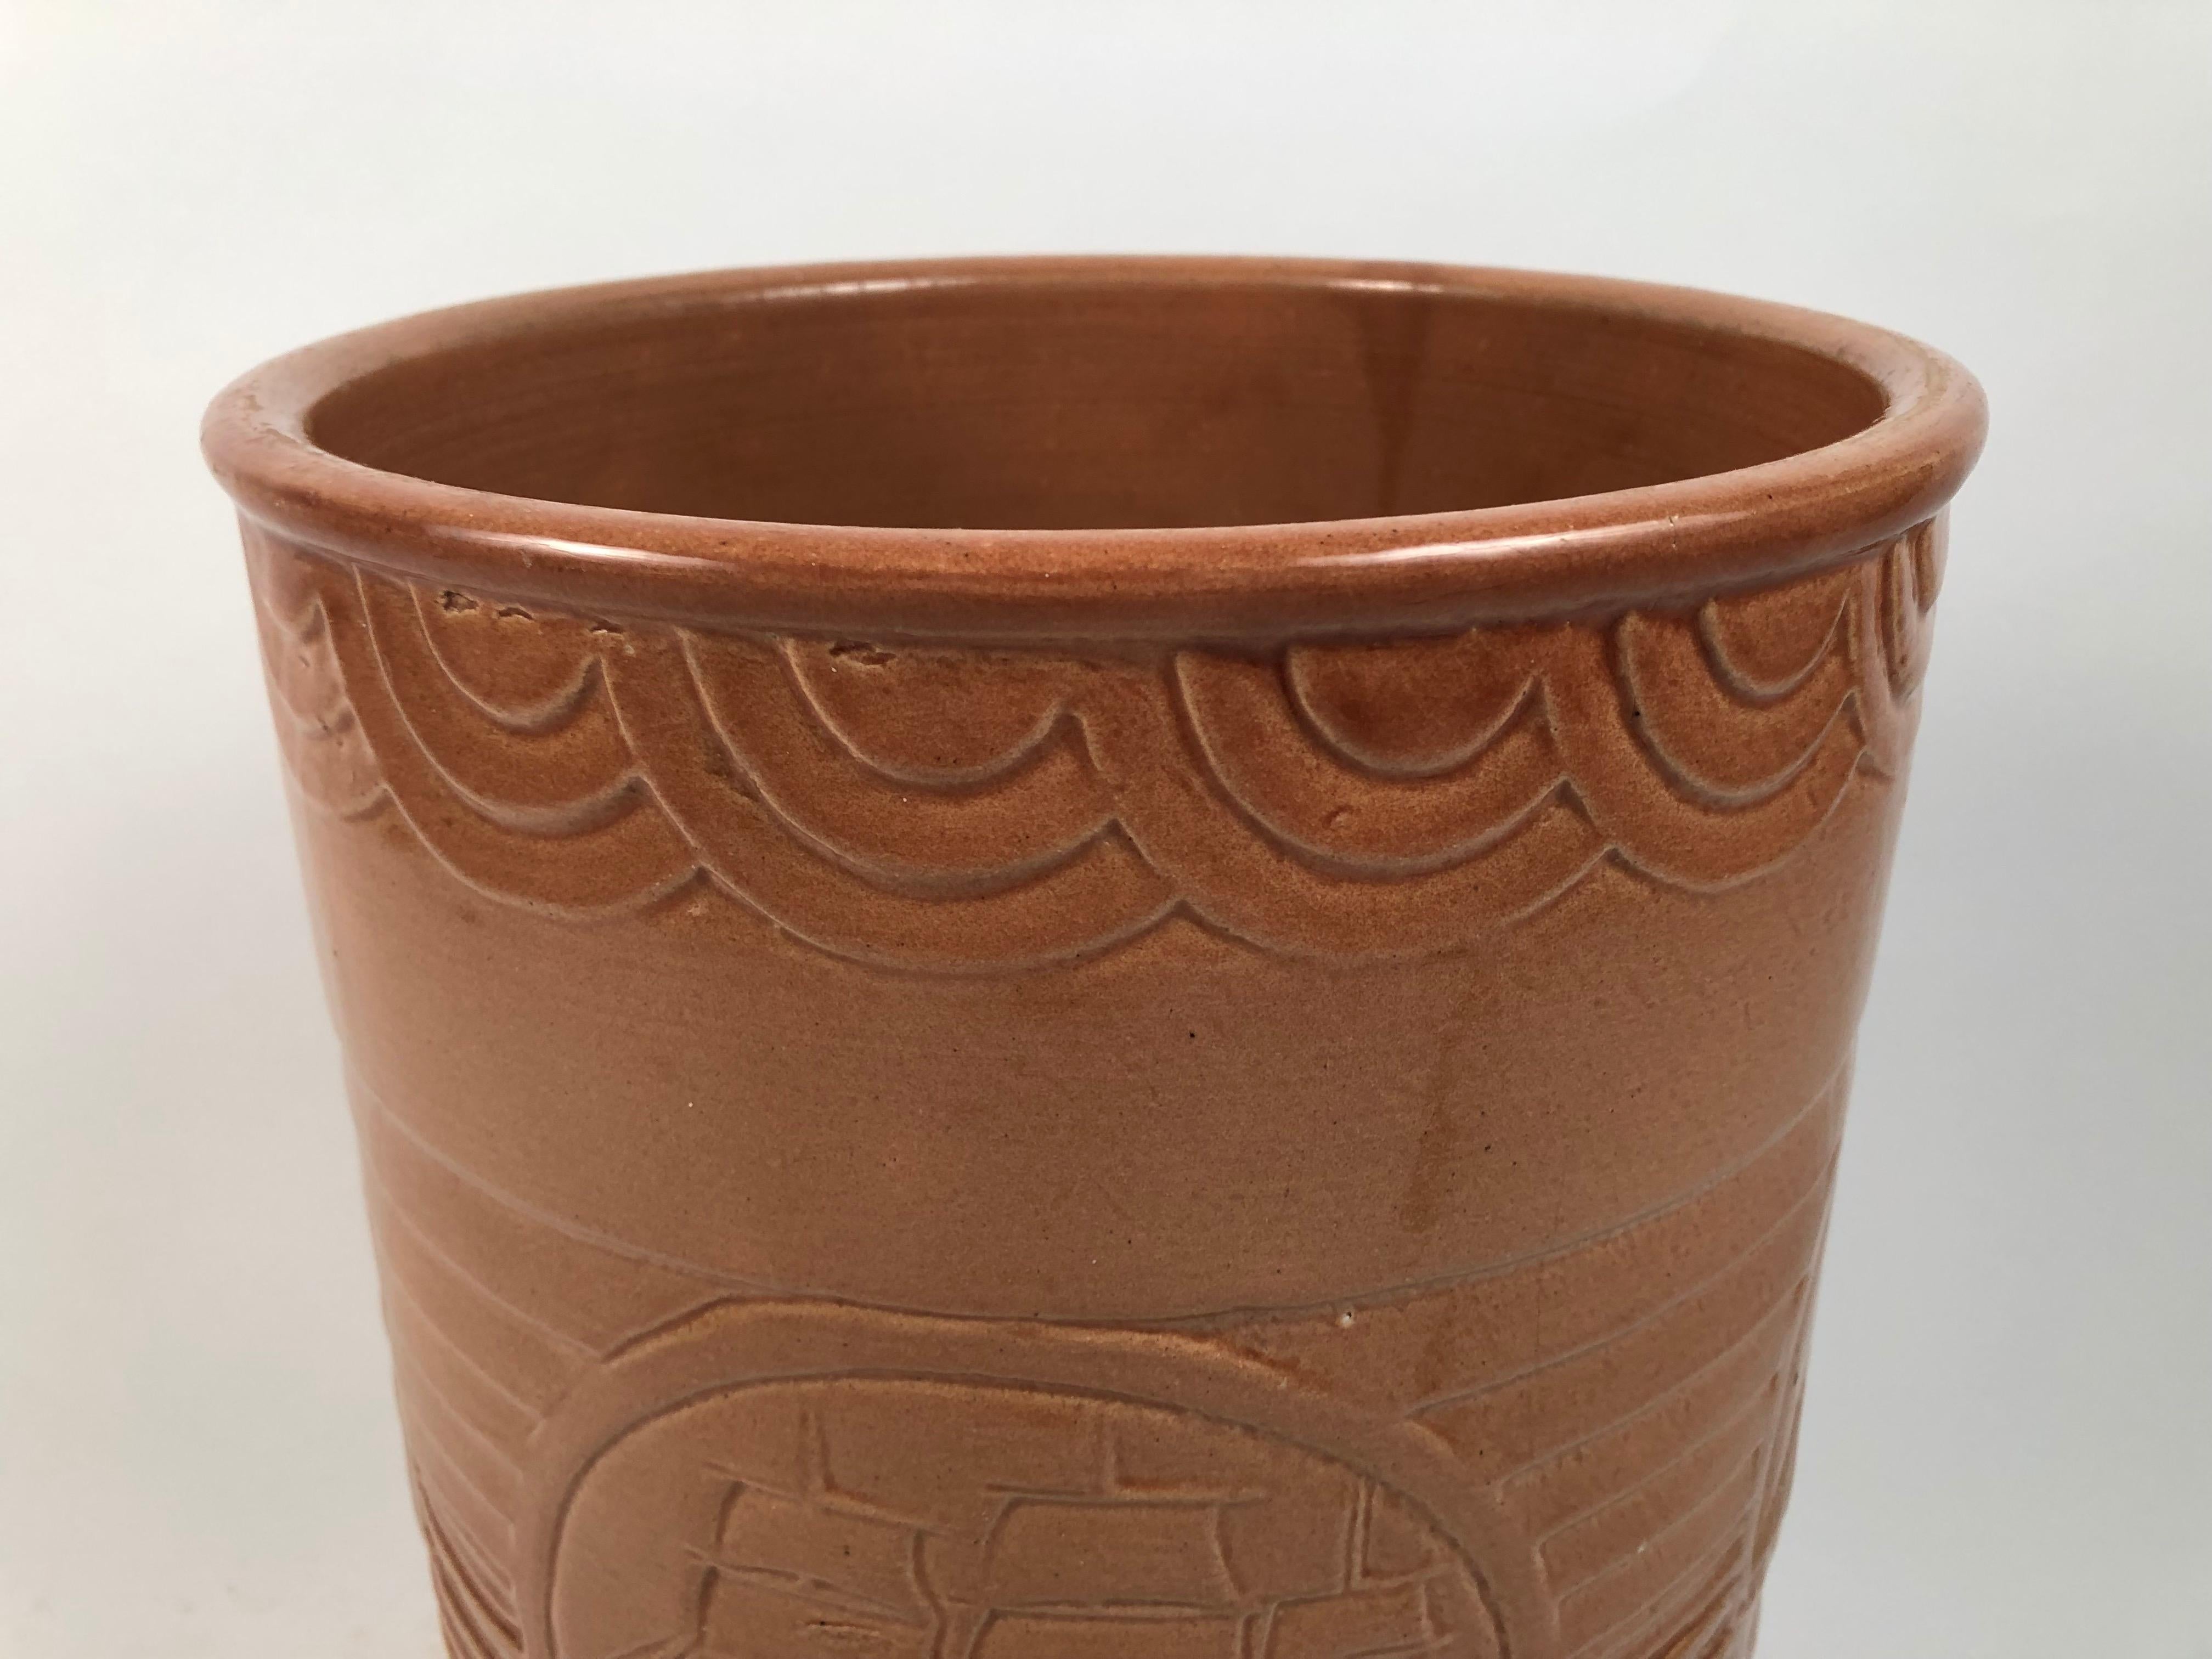 An American Art Deco period glazed tan ceramic waste basket, of cylindrical form, decorated with a bas relief medallion featuring a schooner in the center flanked by horizontal bands, with semi-circular geometric borders at the top and bottom. Would